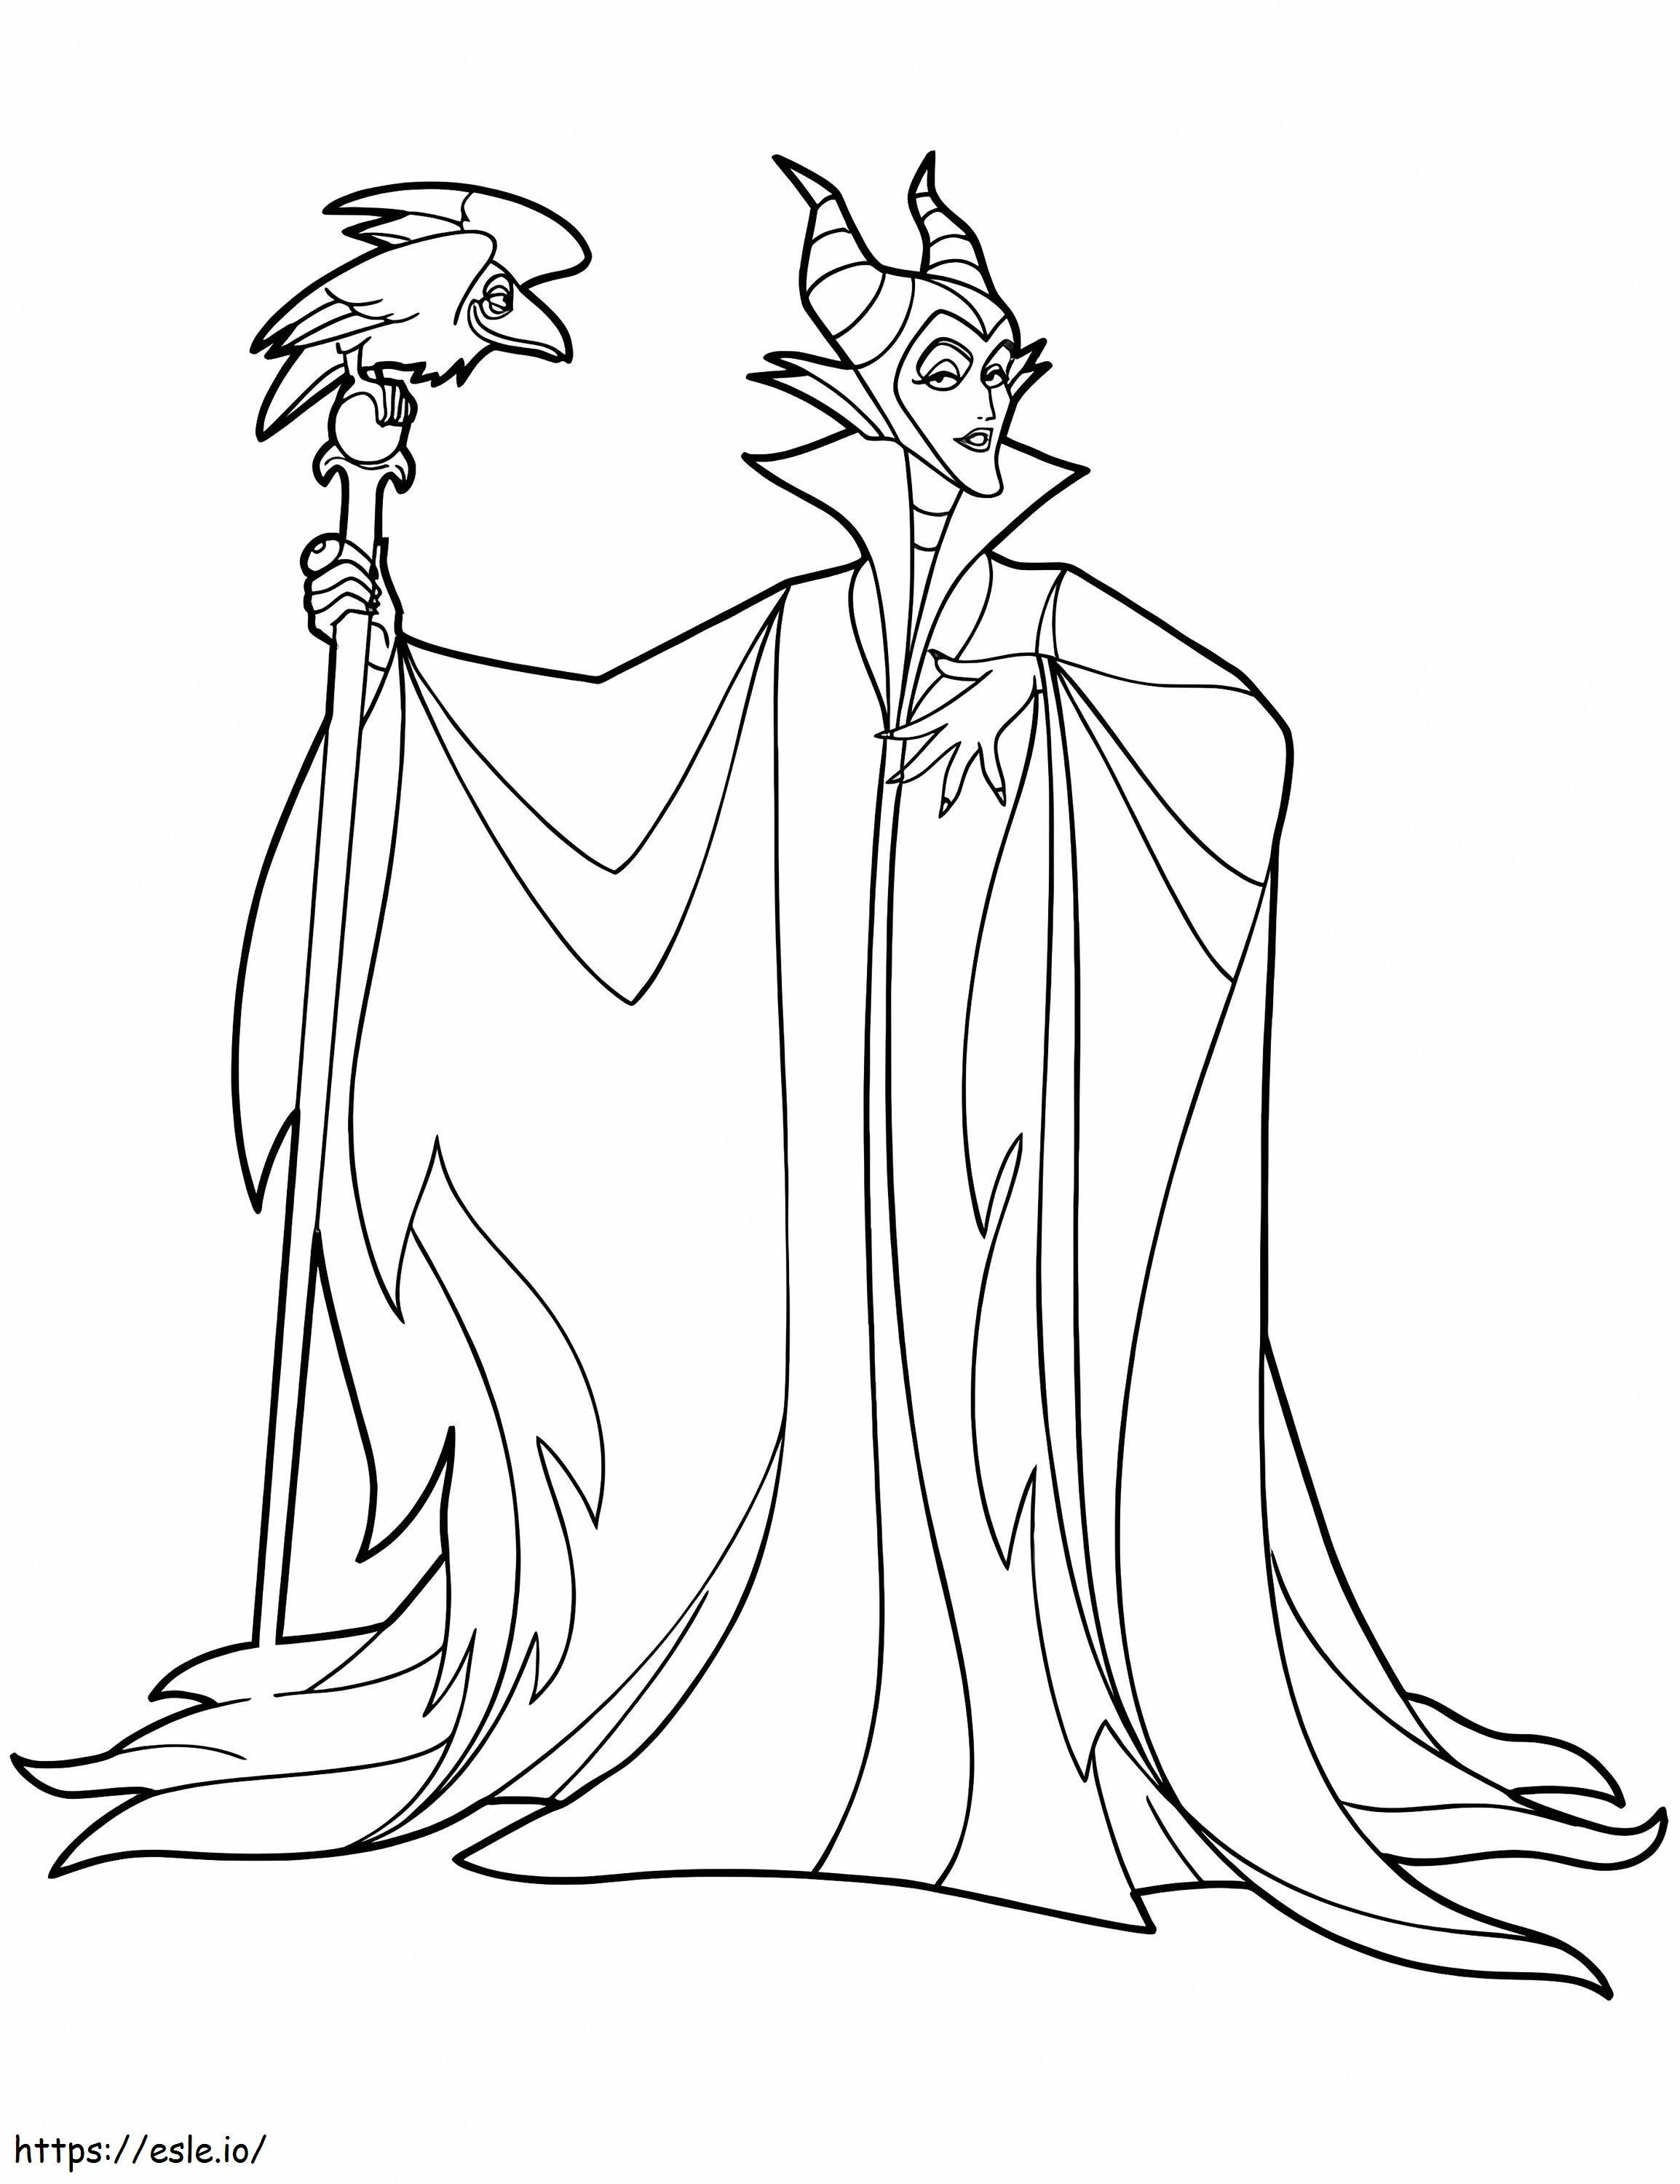 Maleficent Disney Villain coloring page